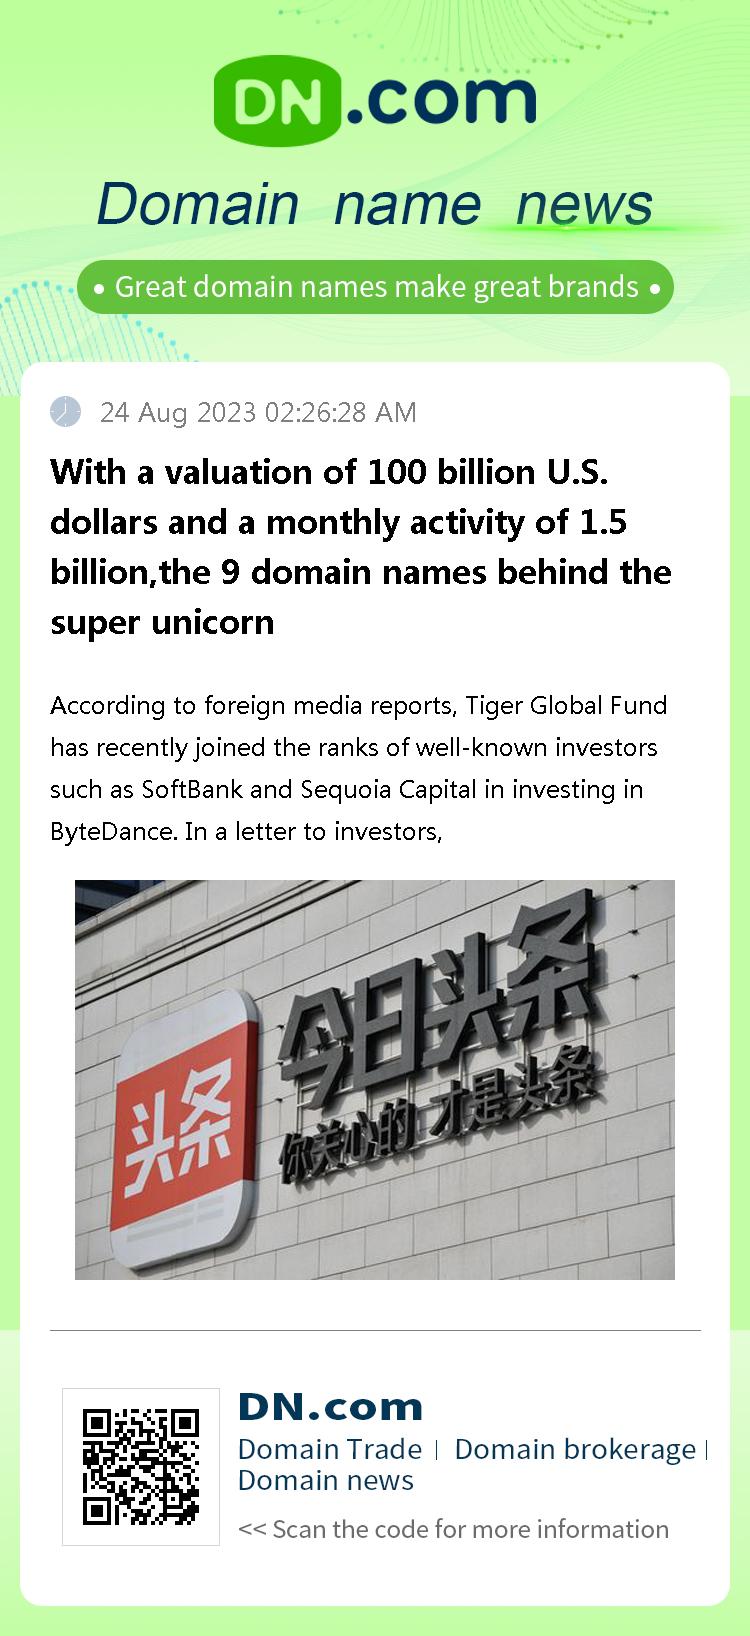 With a valuation of 100 billion U.S. dollars and a monthly activity of 1.5 billion,the 9 domain names behind the super unicorn